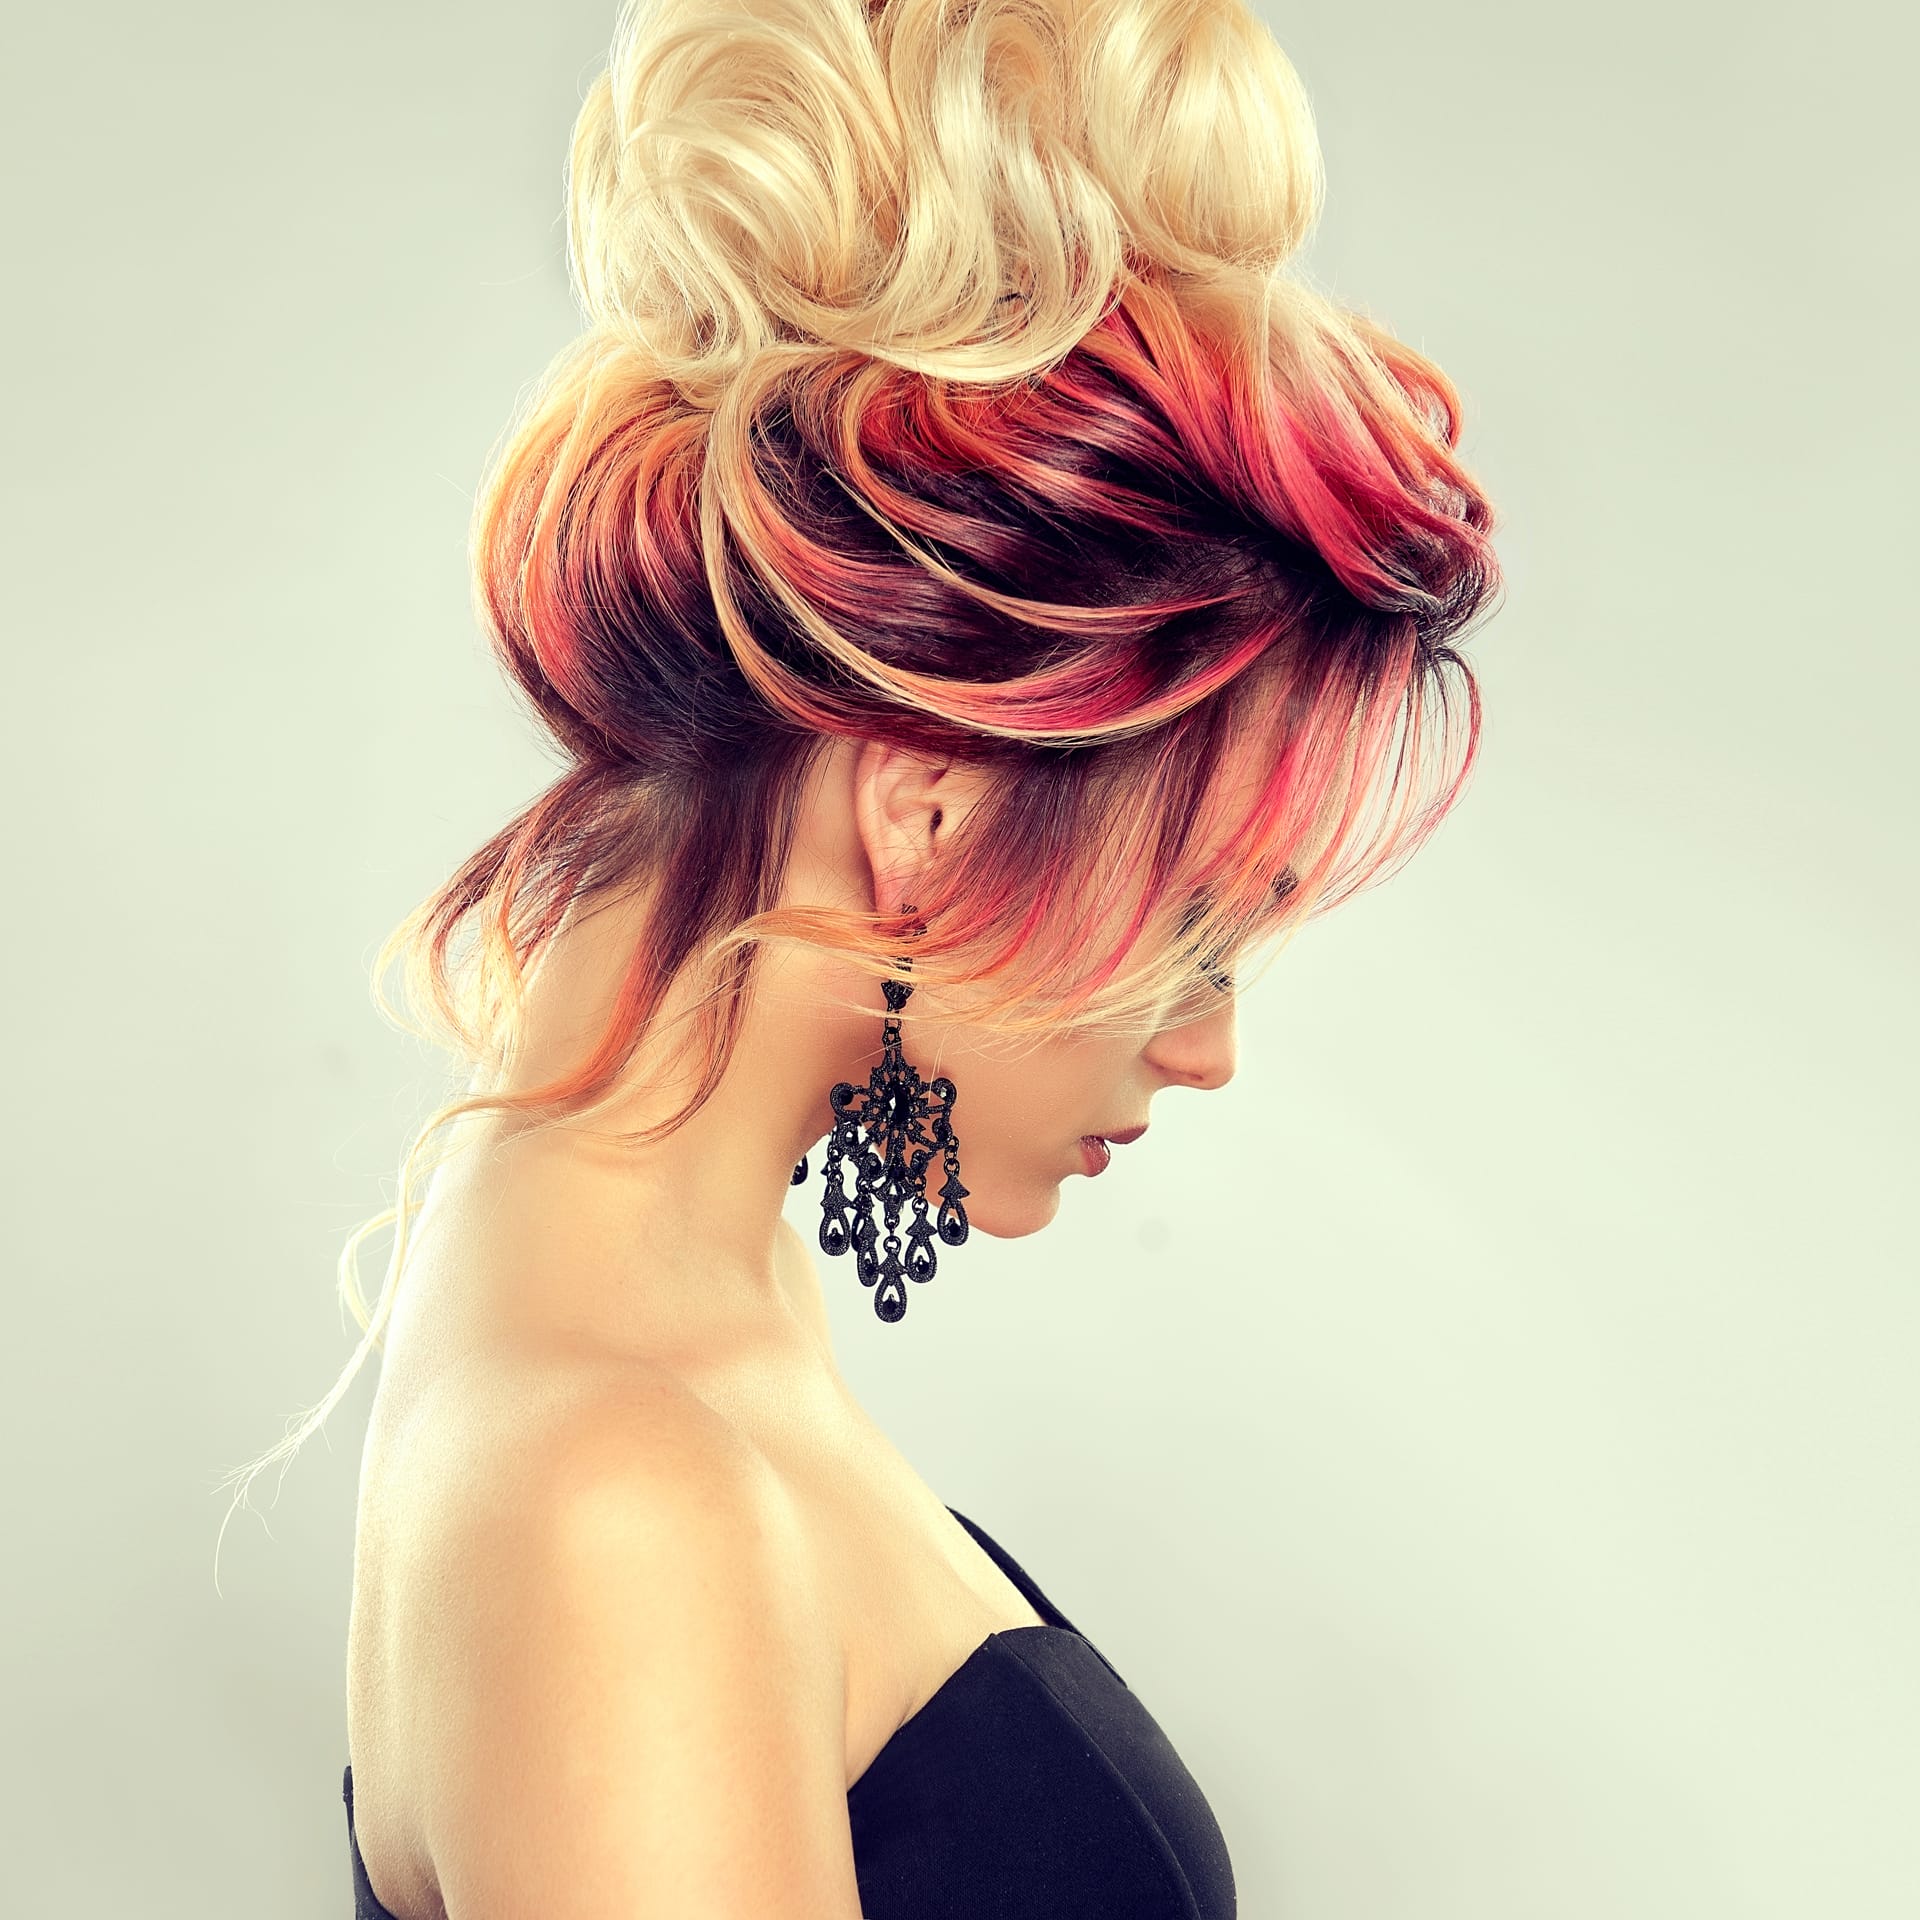 Hair gathered elegant evening hairstyle with big blonde bun hairdressing art coloration hair